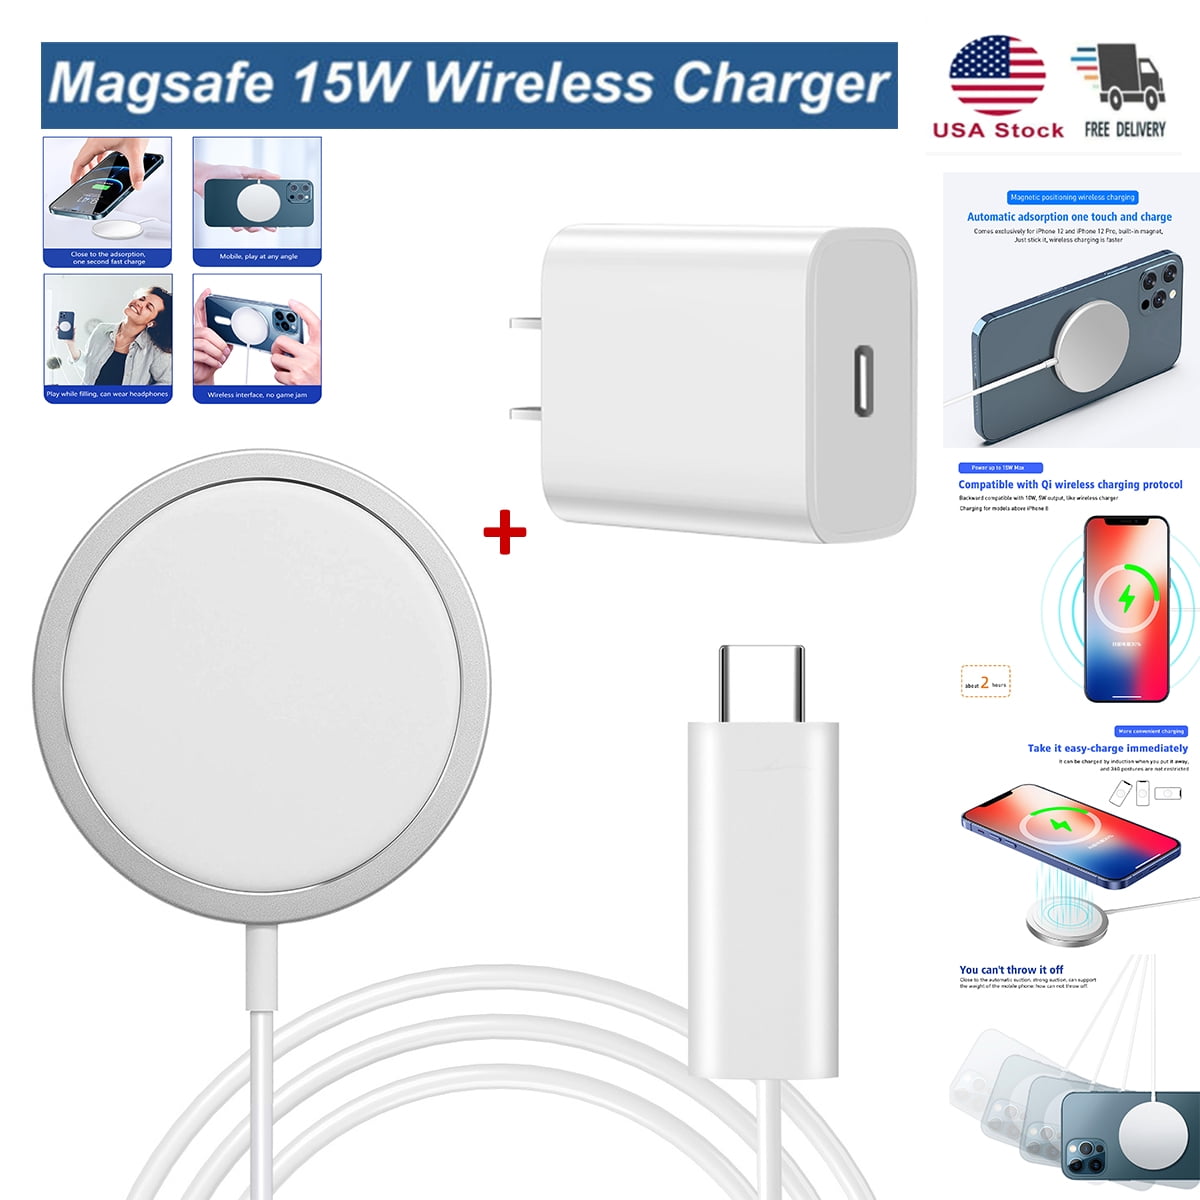 Fast Wireless Charging Pad with Type C Port KUULAA 15W Magnetic Wireless Charger Compatible with MagSafe Wireless Charger for iPhone 12/12 mini/12 Pro/12 Pro Max,AirPods Pro & etc No AC Adapter 